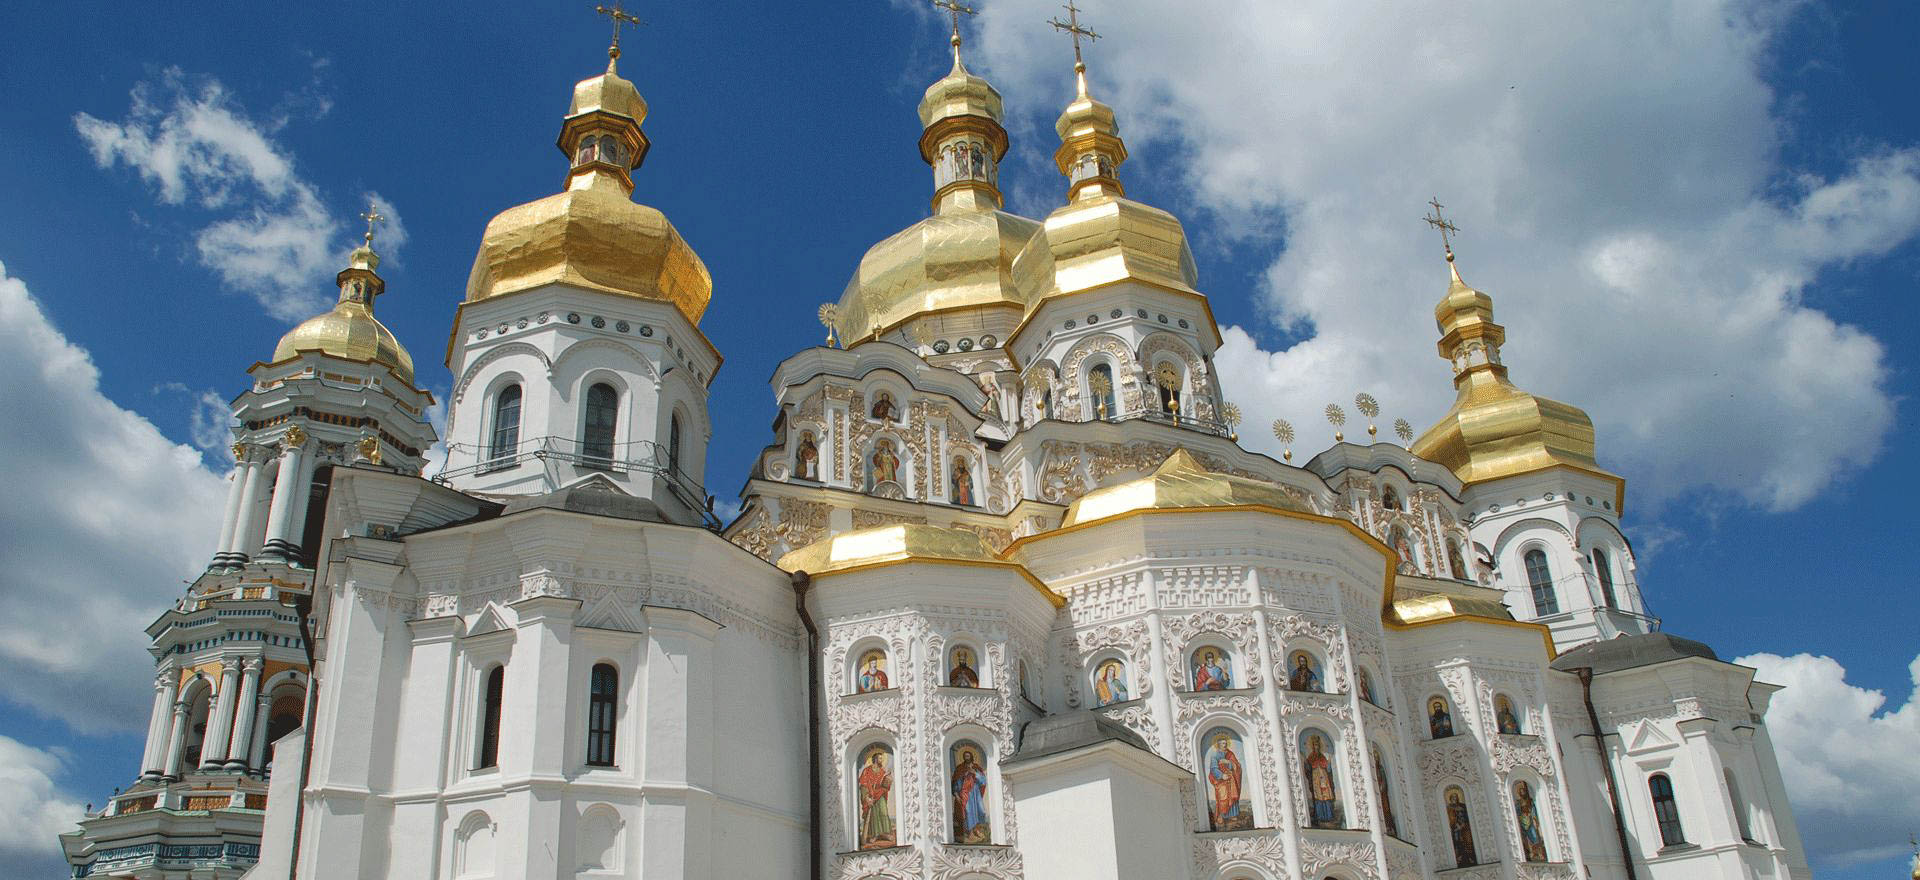 Ukraine Holidays and Tours - Gold domed monastery in Lavra, Kiev